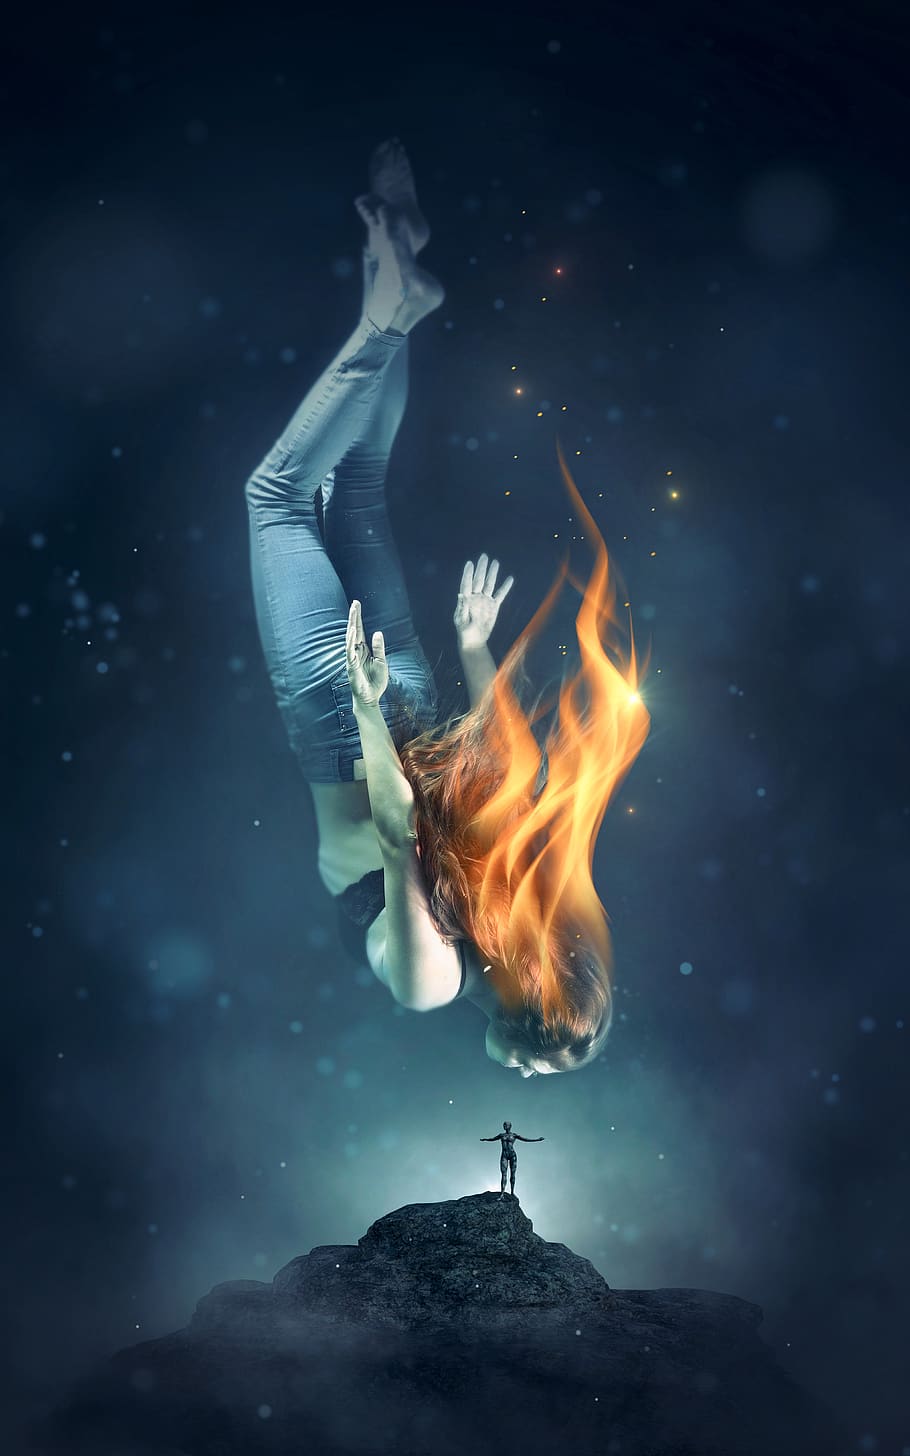 book cover, fantasy, woman, water, fire, flame, diving, girl, mystical, mysterious